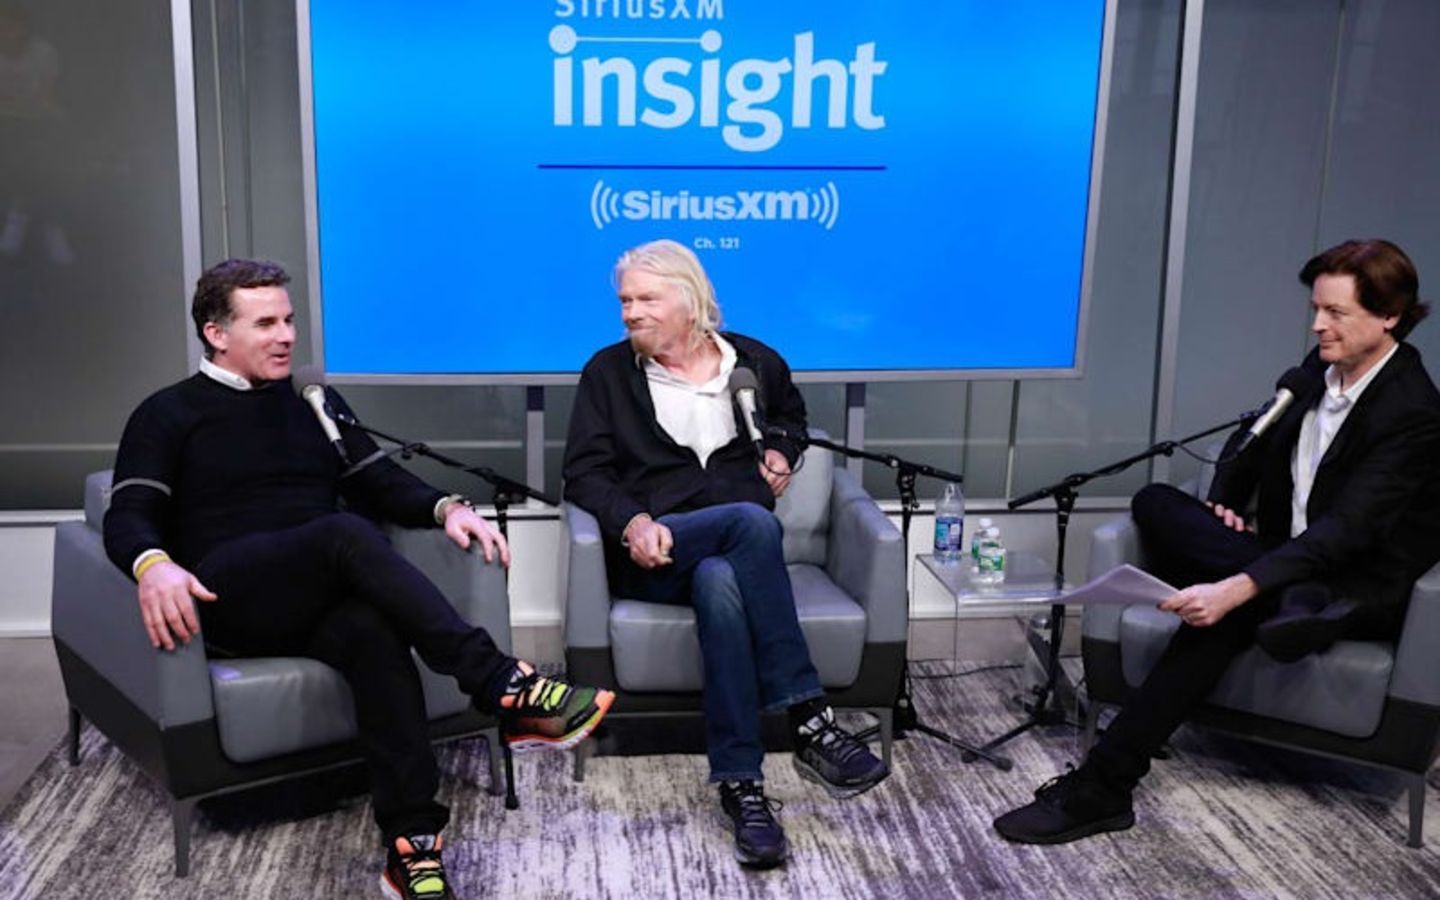 Richard Branson, Kevin Plank and John Fugelsang sitting and talking on SiriusXM radio show Learning with Richard Branson